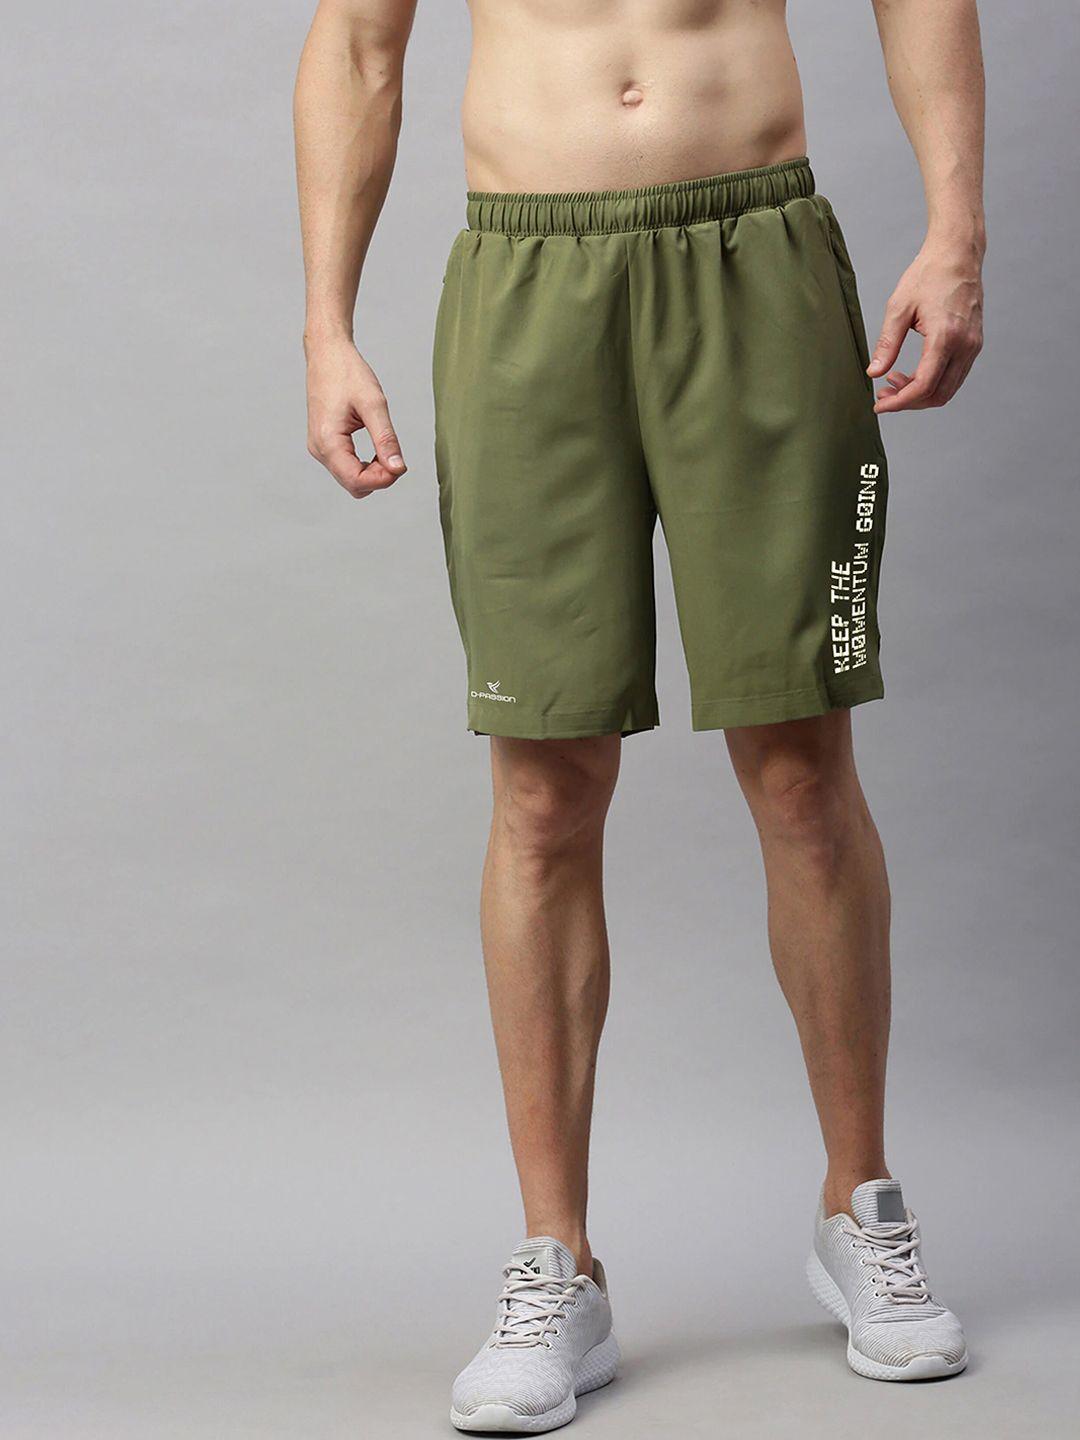 dpassion men olive green solid training or gym sports shorts